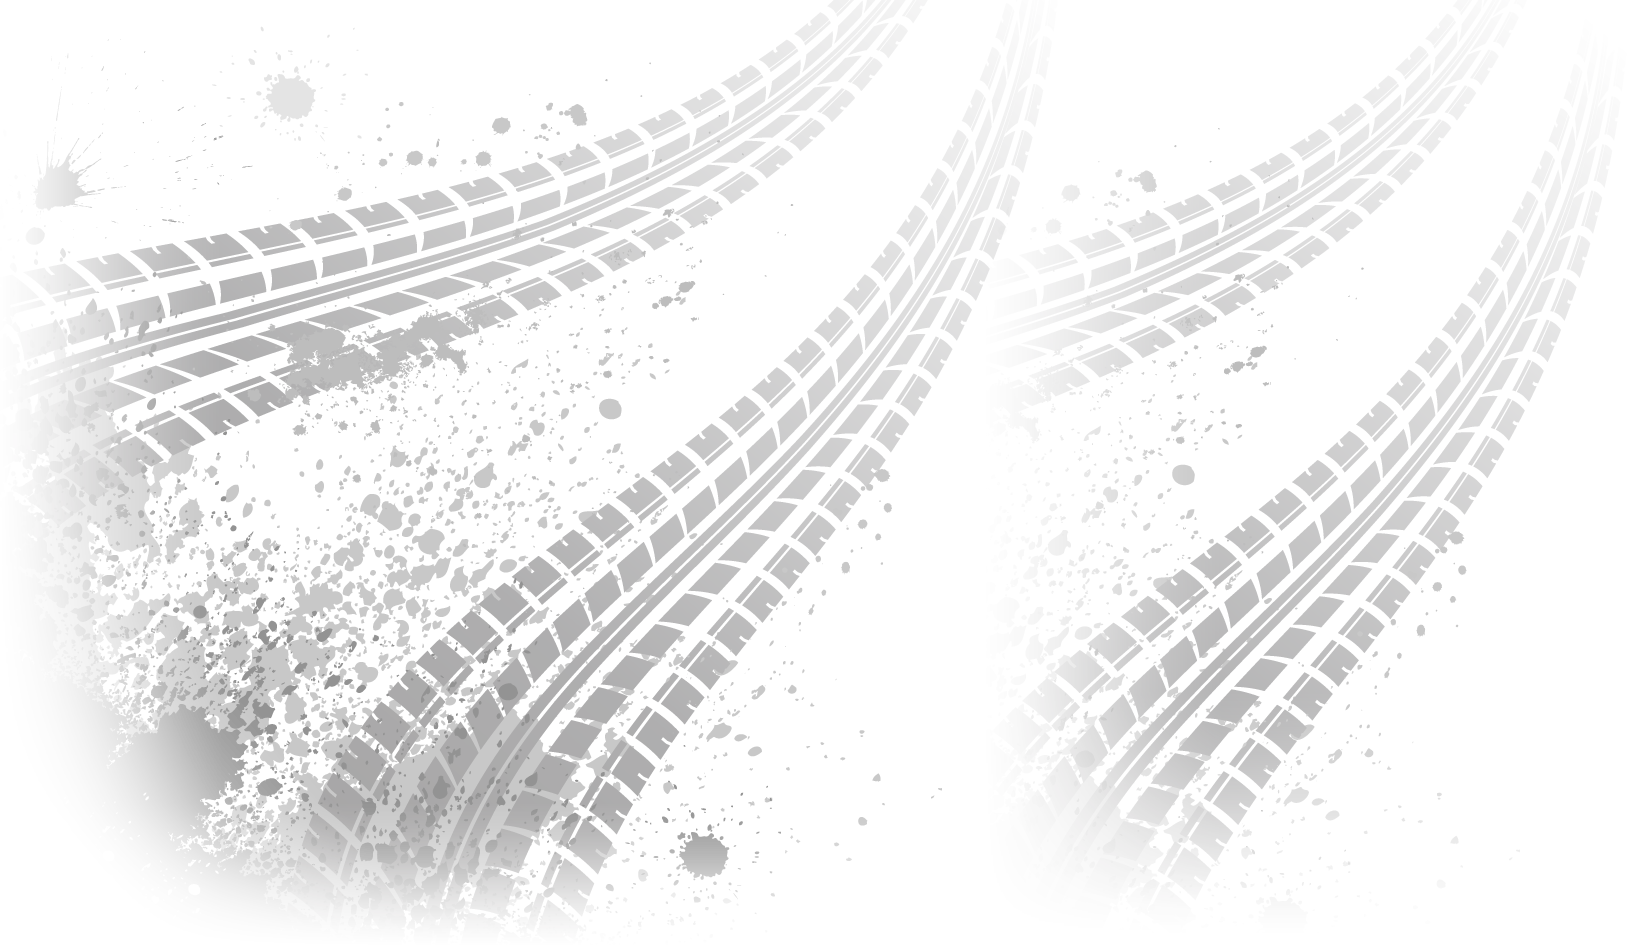 tire tracks png clipart best 